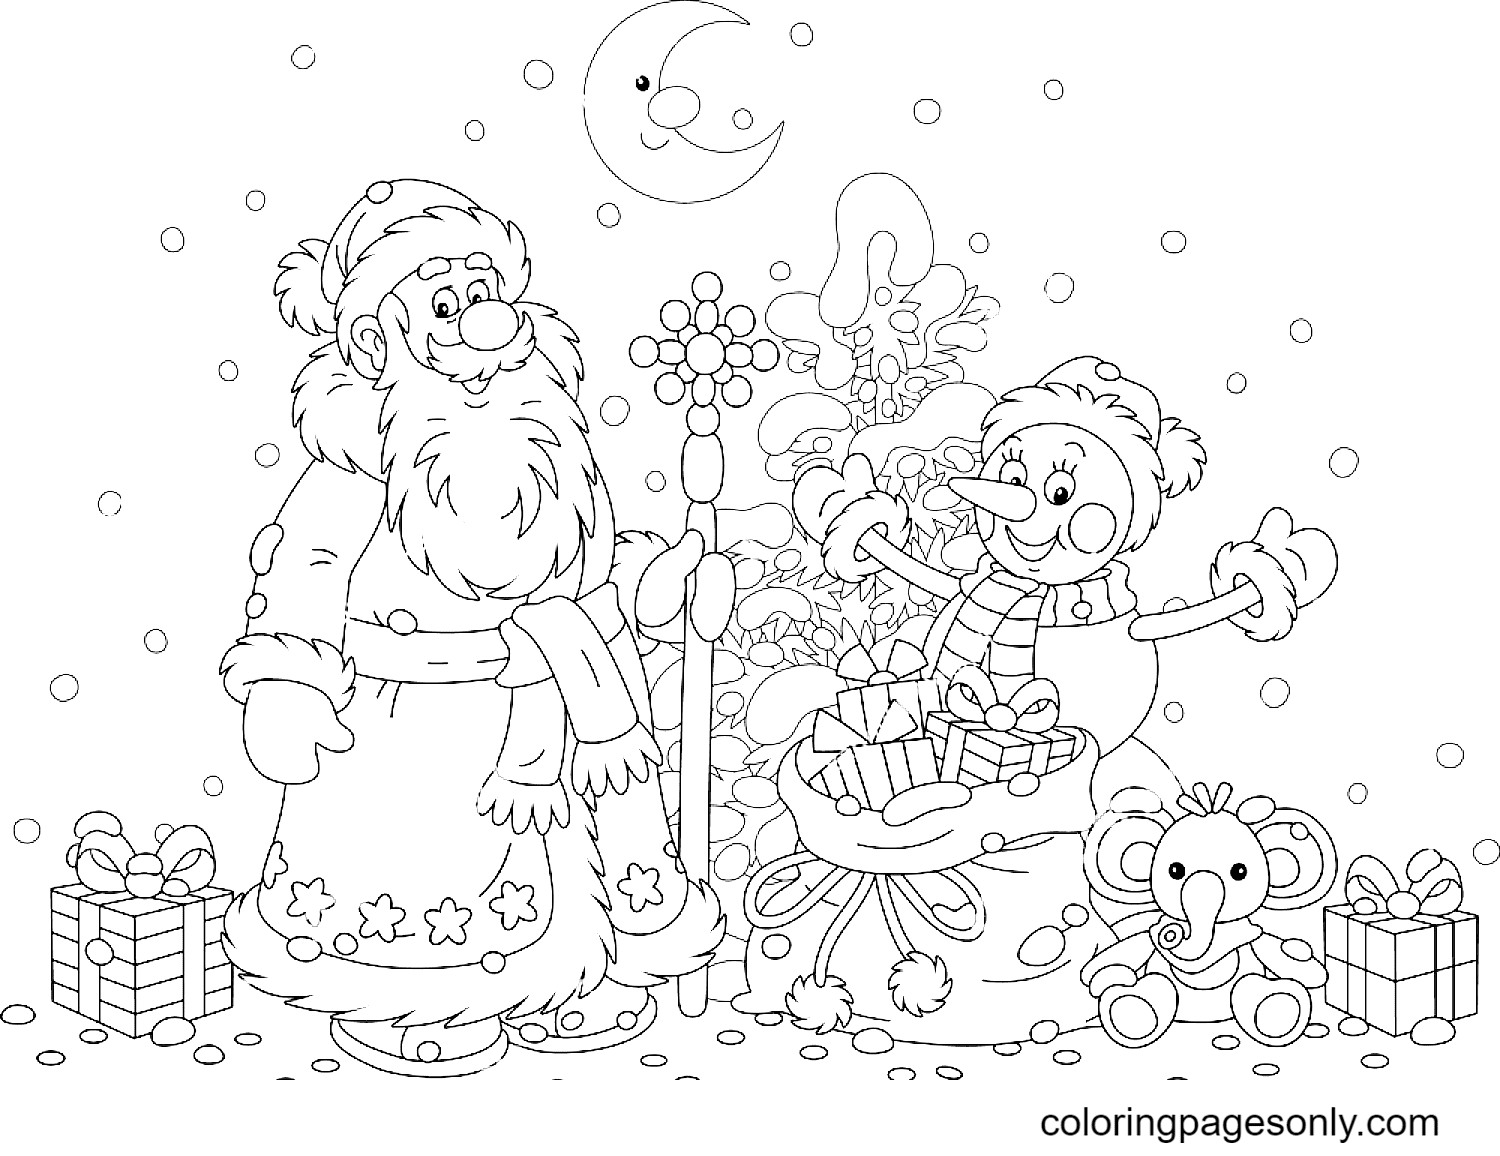 Santa Claus, a Magic Gift Bag, snowman with a Snowy Christmas tree Coloring Pages